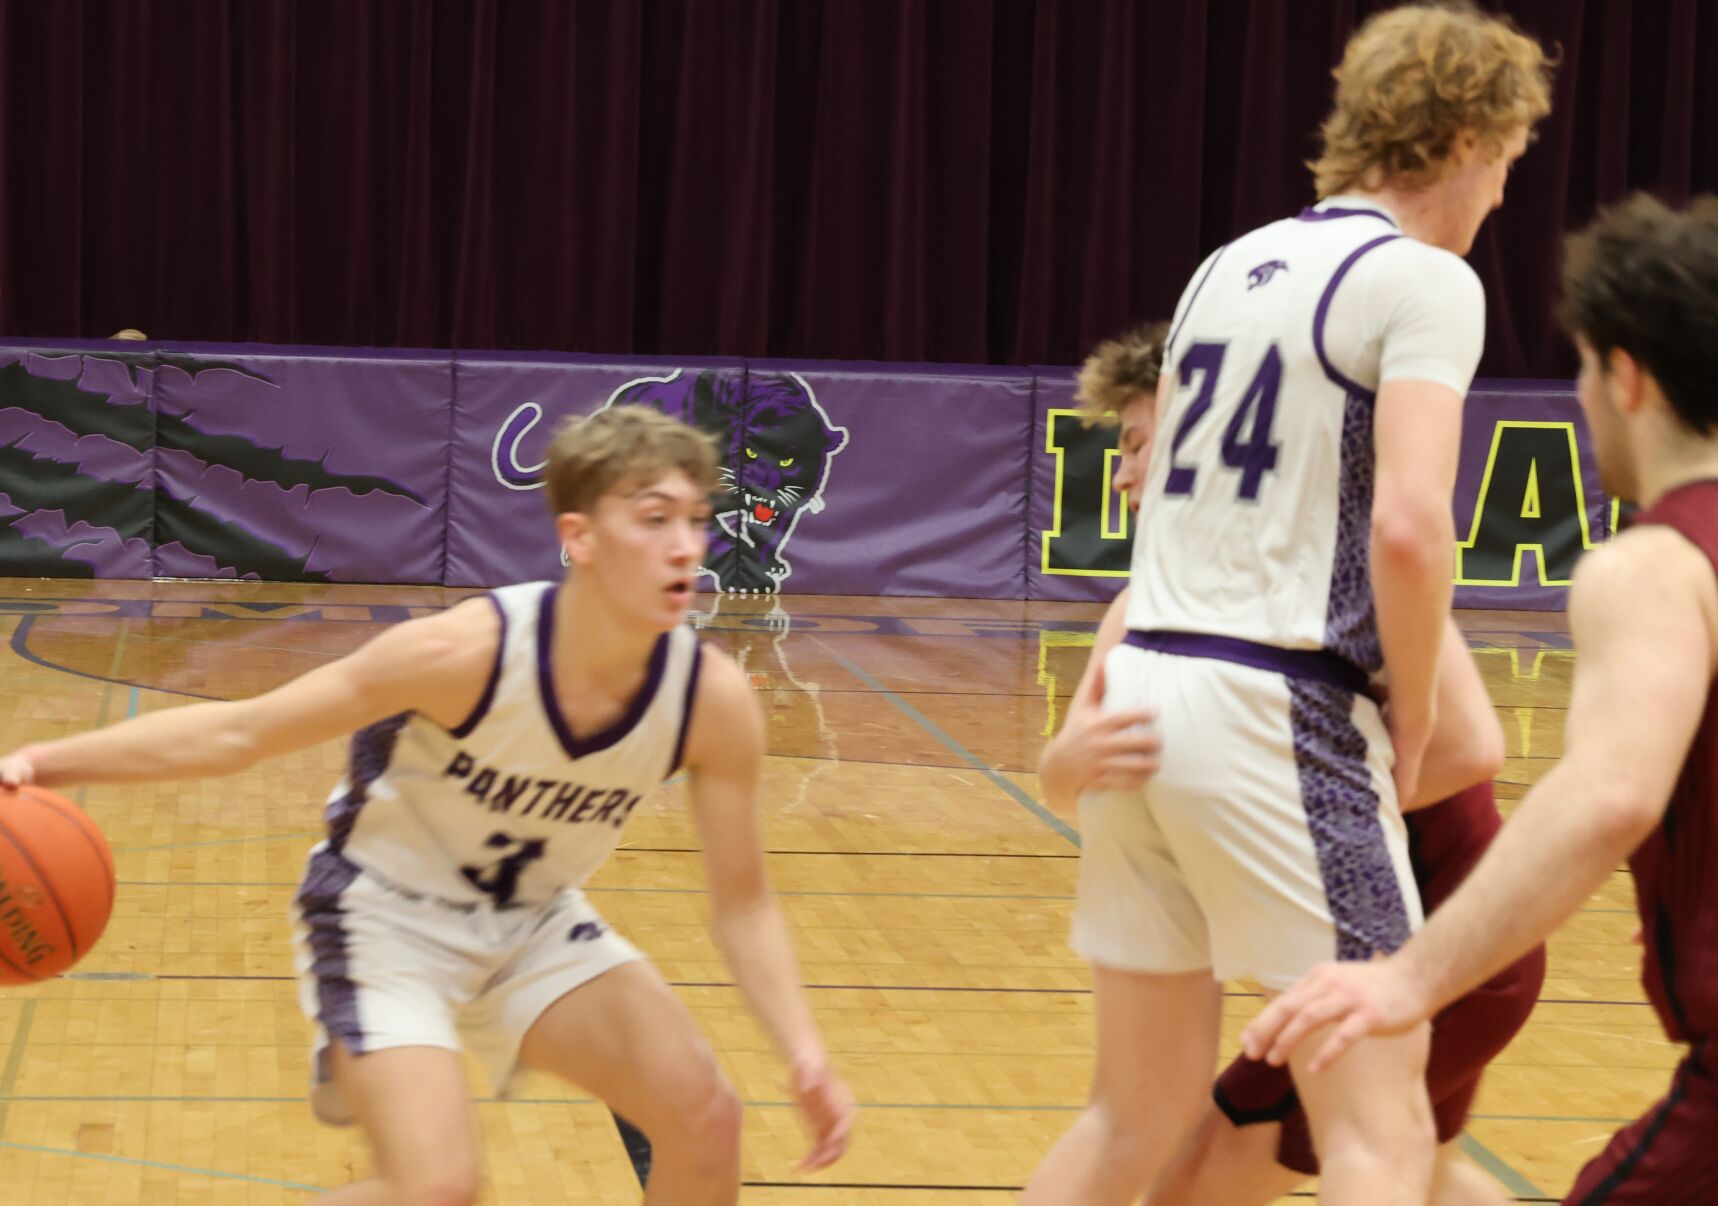 Durand-Arkansaw Boys Basketball Secures Share of Dunn-St. Croix Title with Victory Over Spring Valley